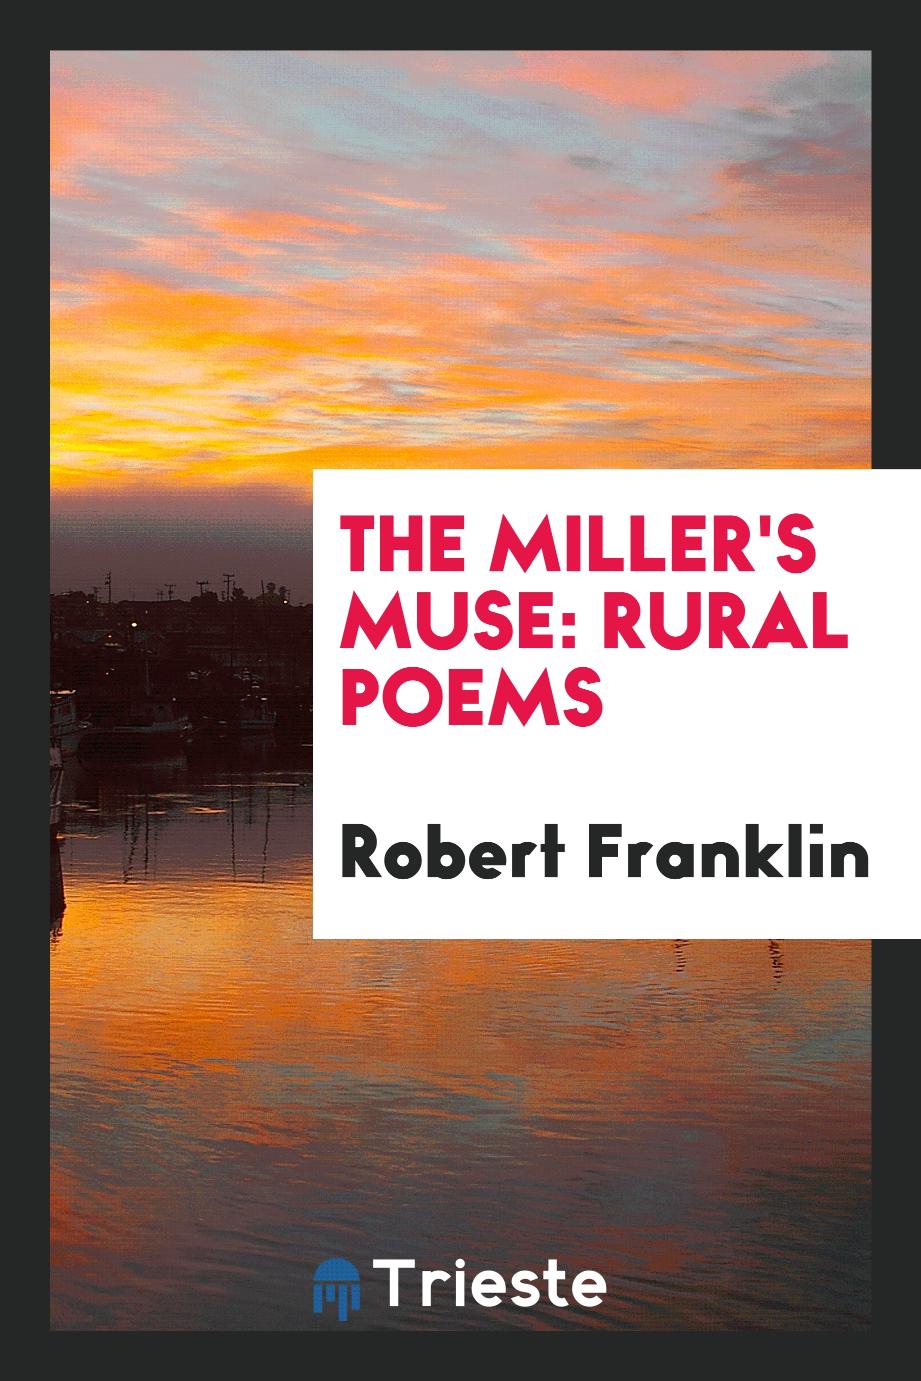 The Miller's Muse: Rural Poems